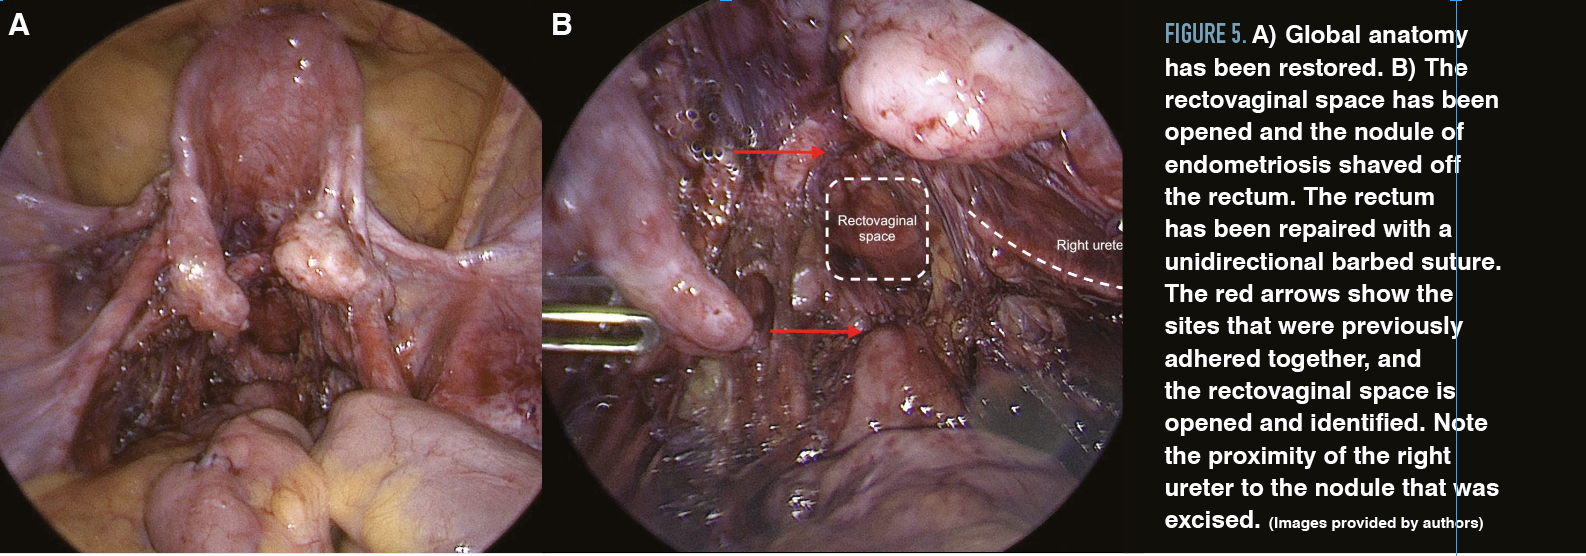 Figure 5. A) Global anatomy has been restored. B) The rectovaginal space has been opened and the nodule of endometriosis shaved off the rectum. The rectum has been repaired with a unidirectional barbed suture. The red arrows show the sites that were previously adhered together, and the rectovaginal space is opened and identified. Note the proximity of the right ureter to the nodule that was excised. (Images provided by authors)